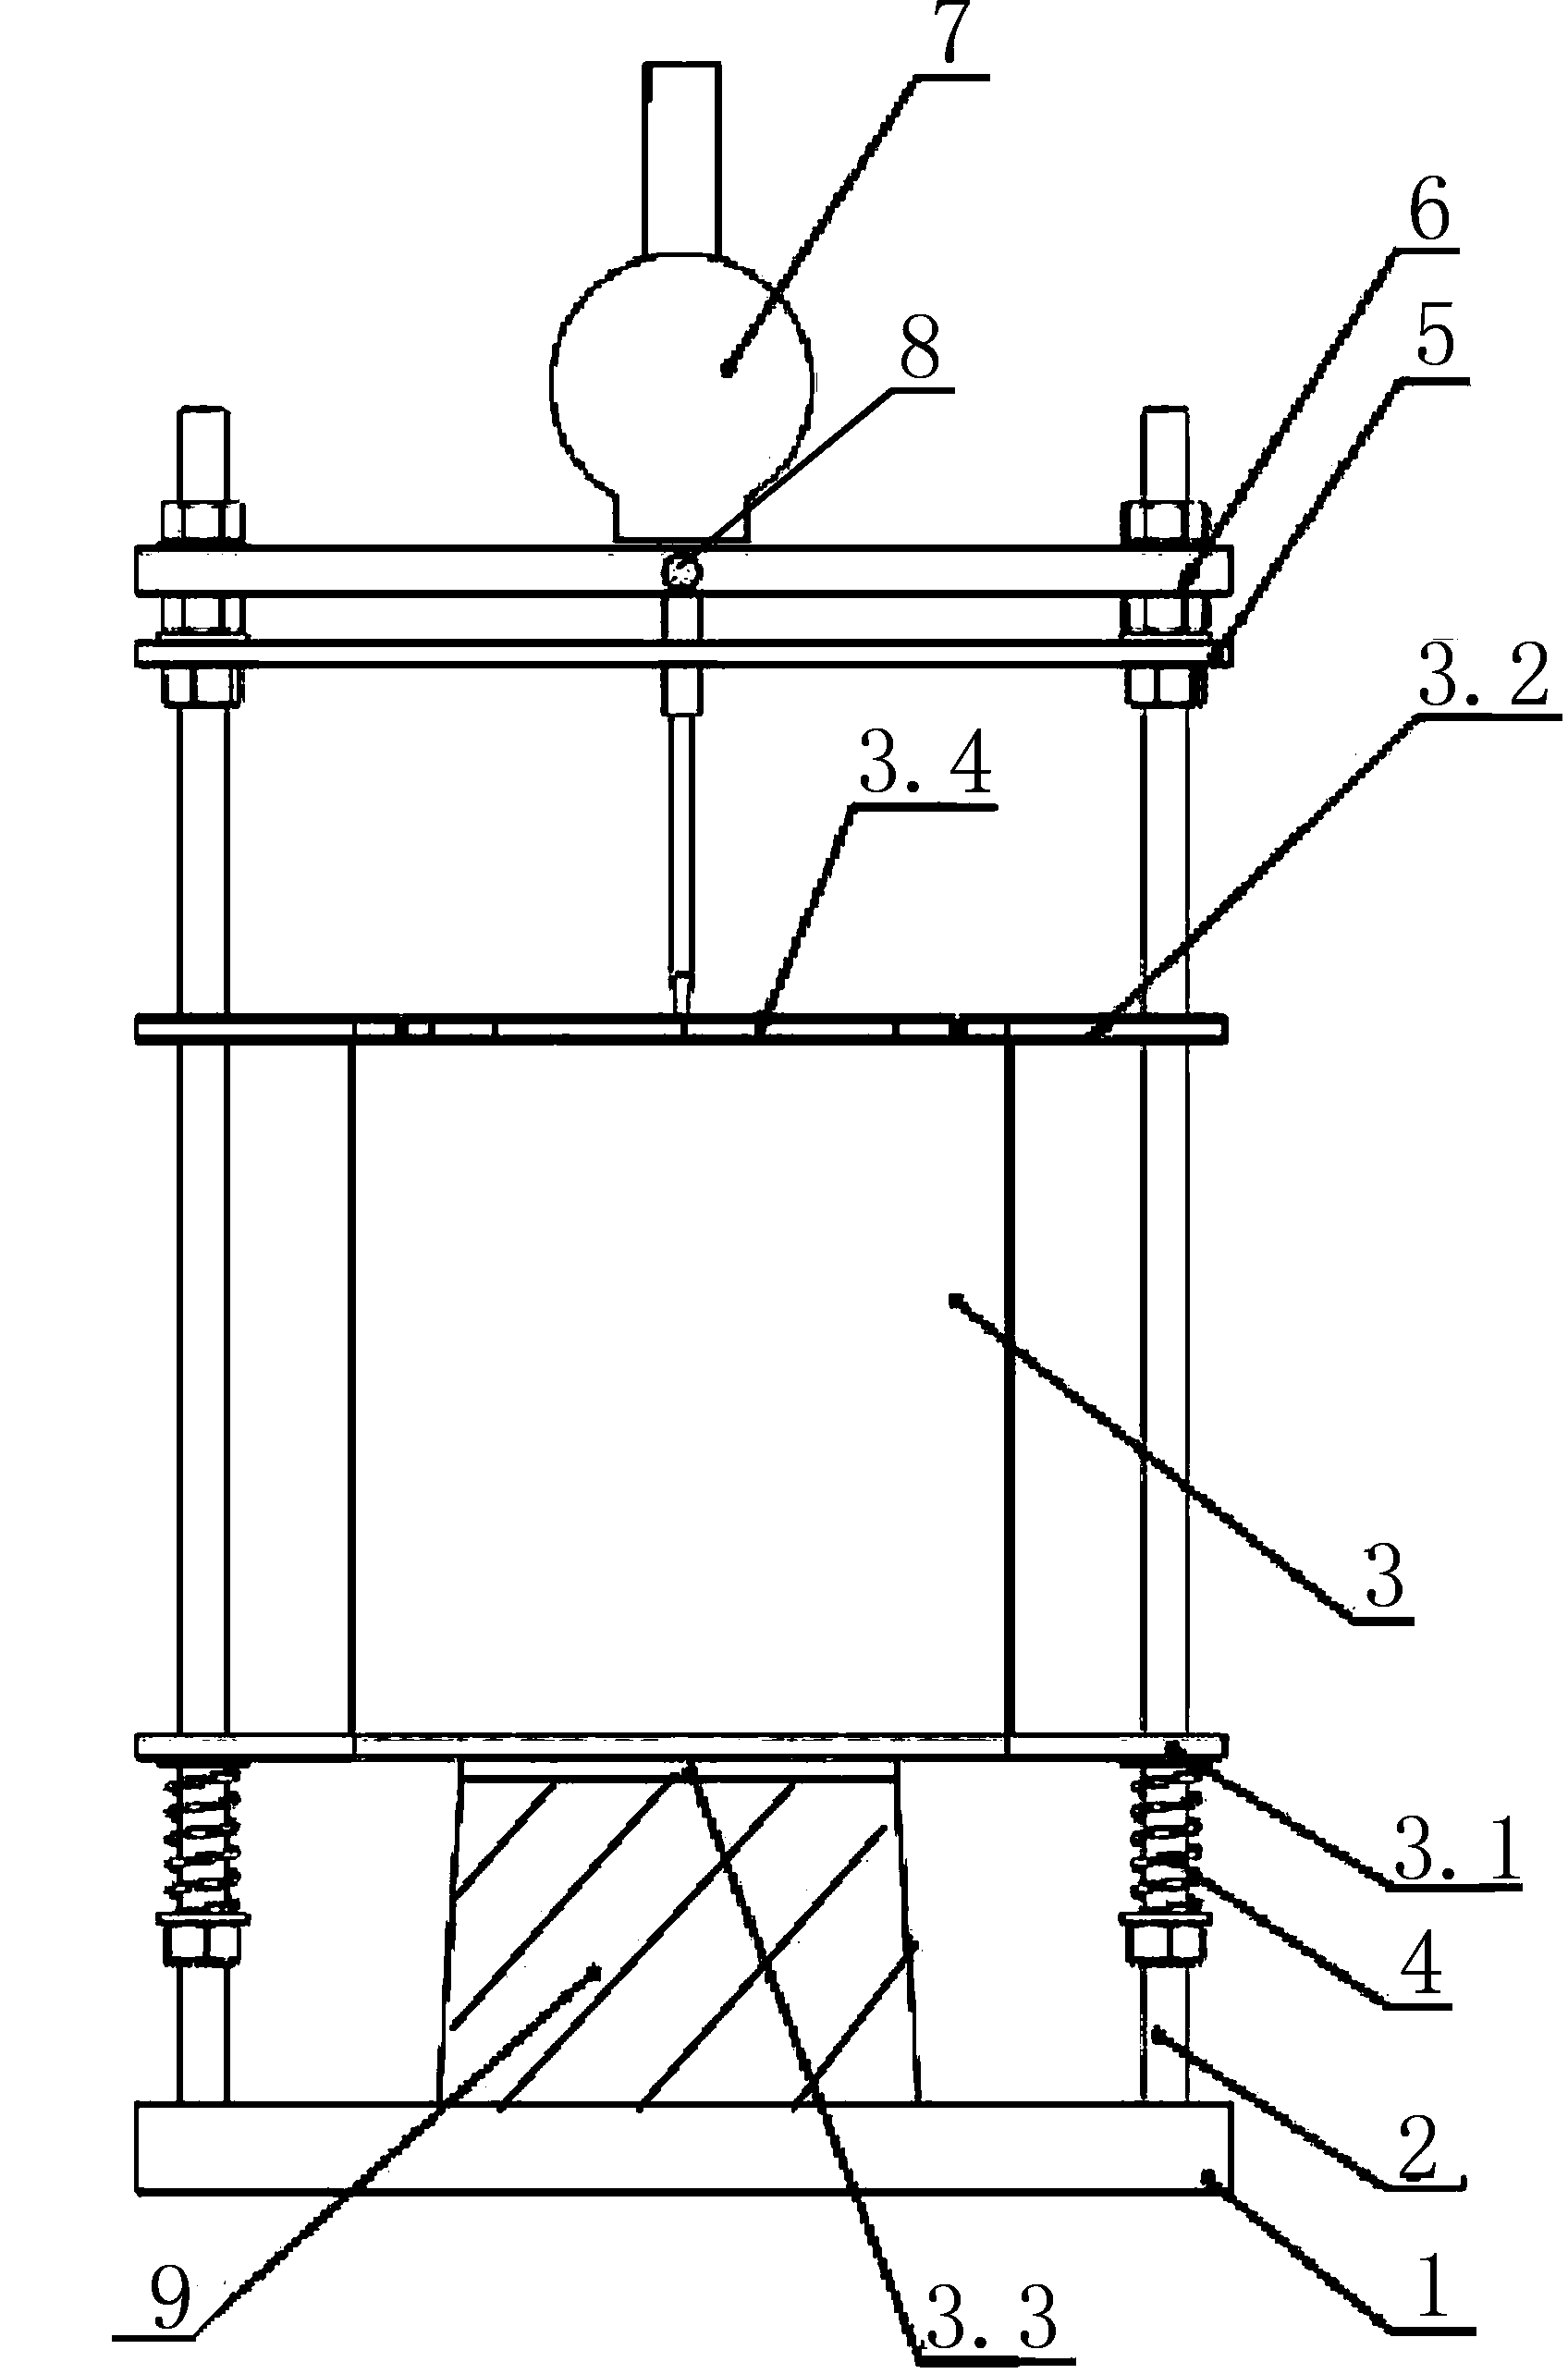 Measurement device and measurement method for fresh mortar non-lateral-confinement bearing capacity